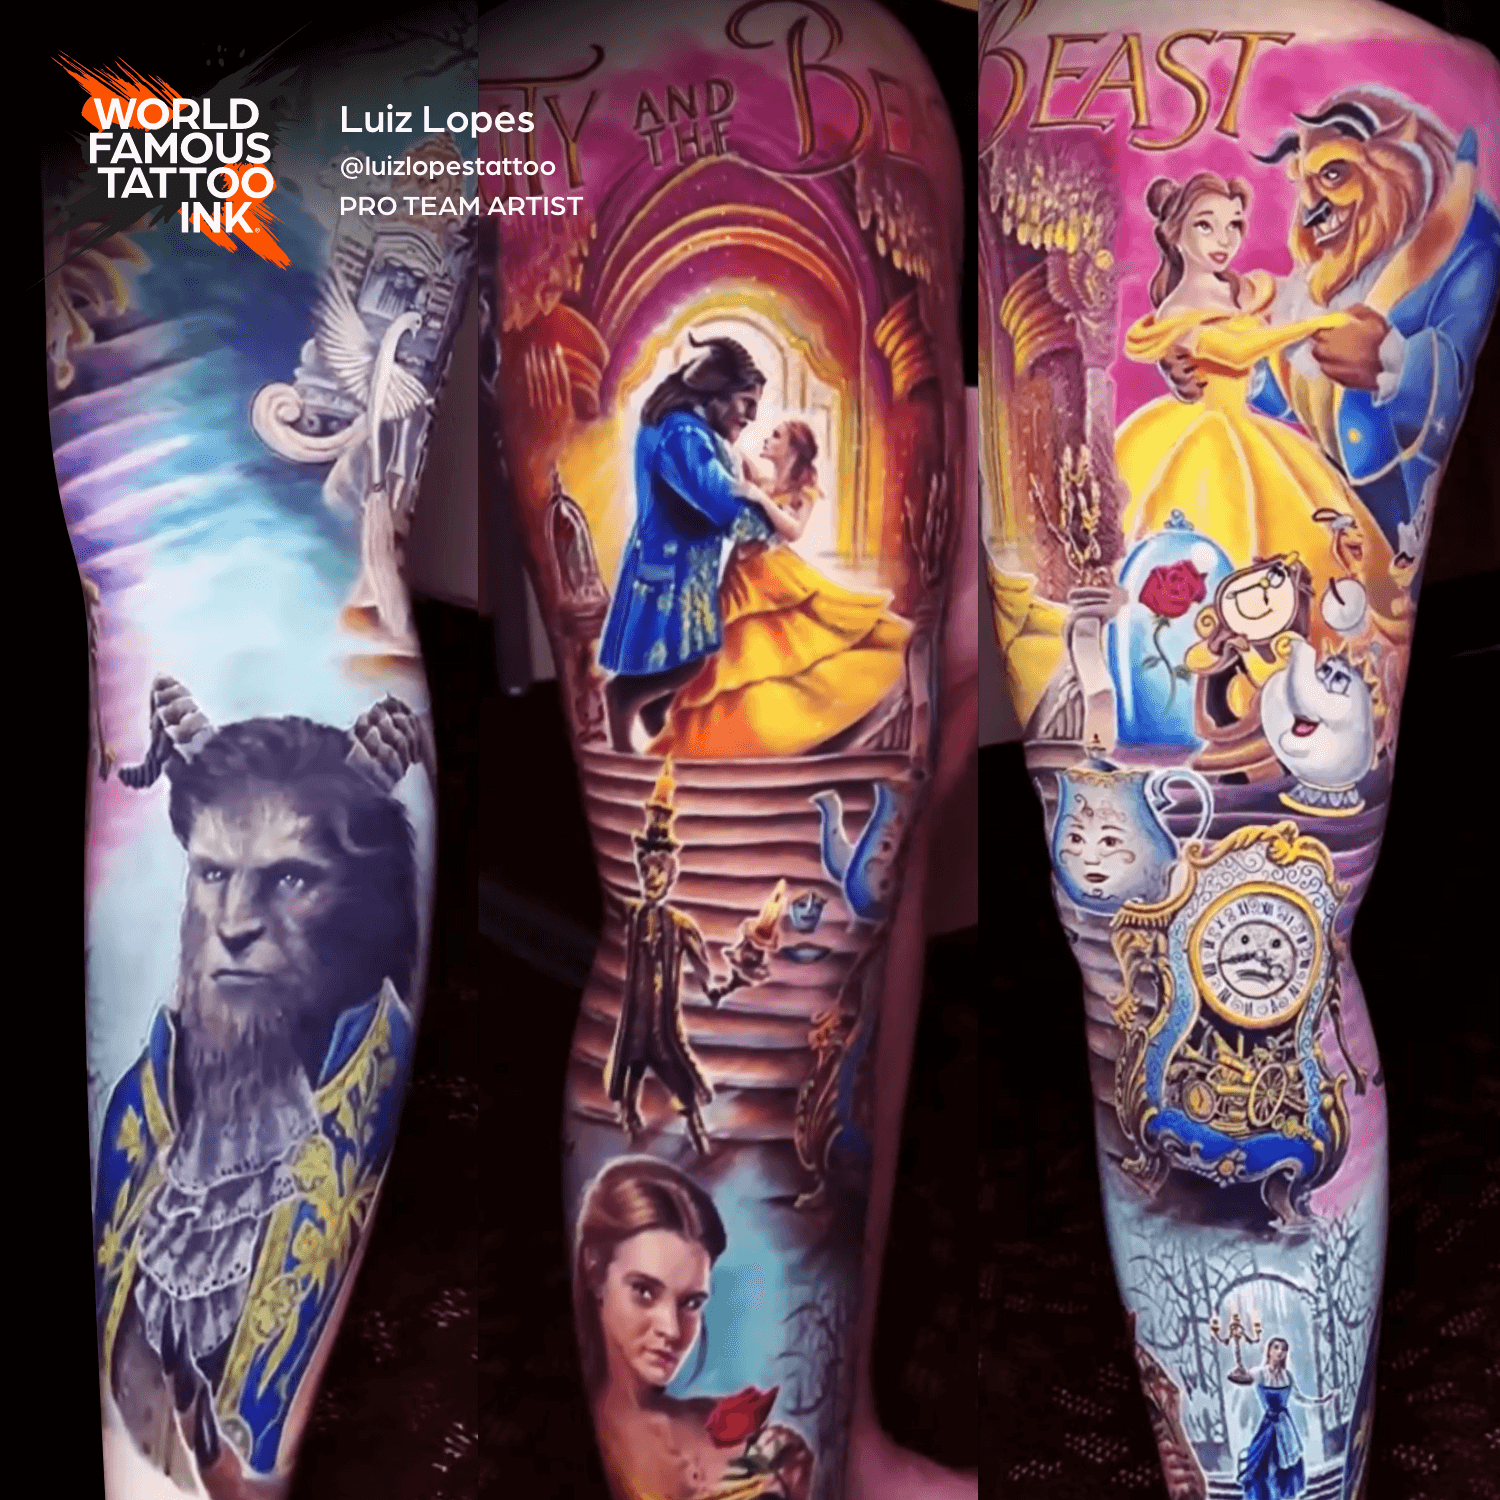 Luiz Lopes CMYK Set Beauty and the Beast Tattoo Four Time Award-Winning Pro Team Artist for World Famous Tattoo Ink